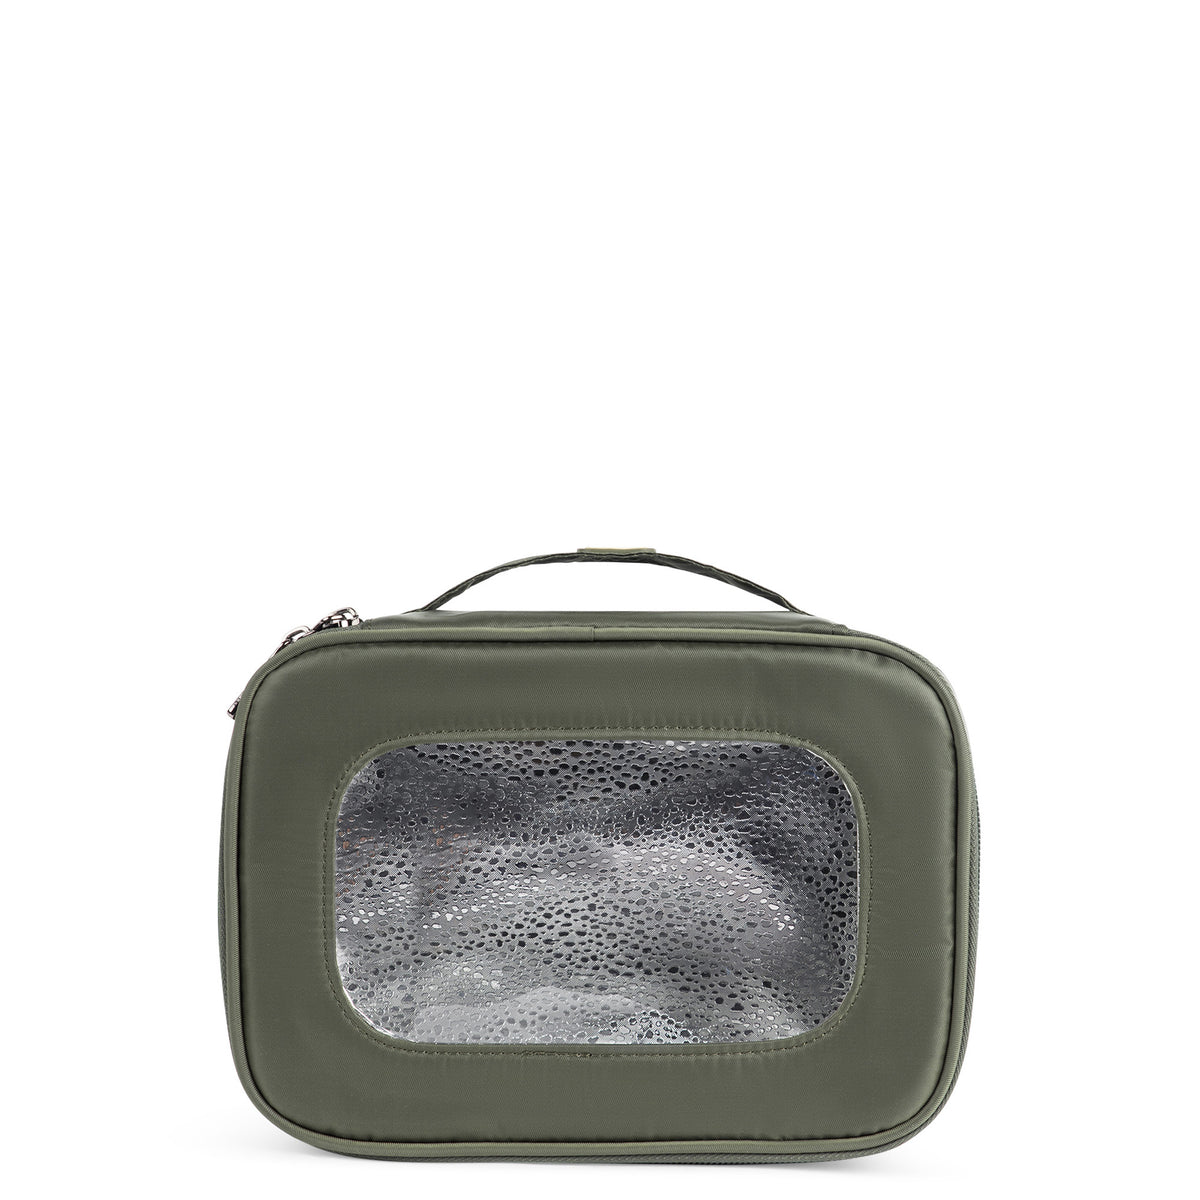 Bento Insulated Container